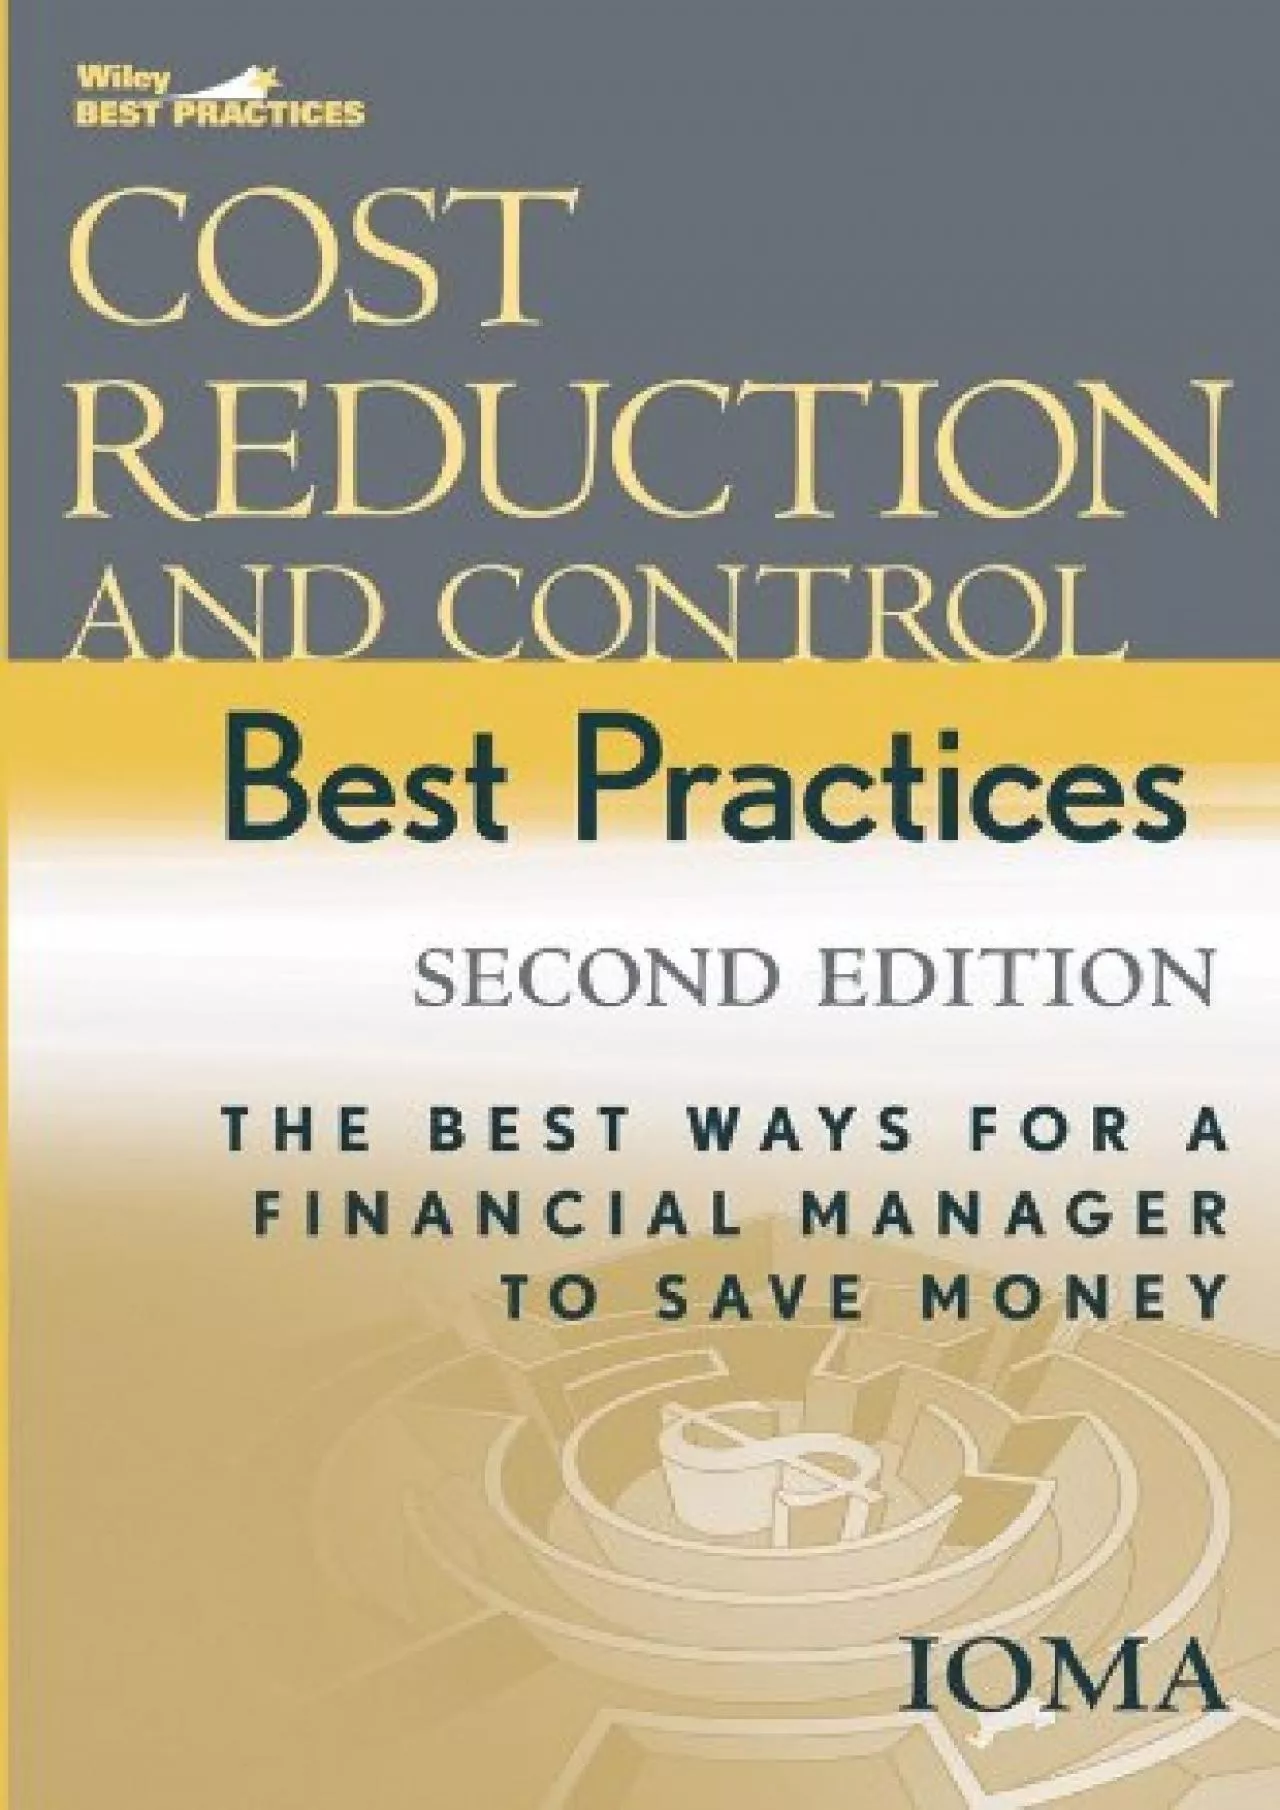 Cost Reduction and Control Best Practices: The Best Ways for a Financial Manager to Save